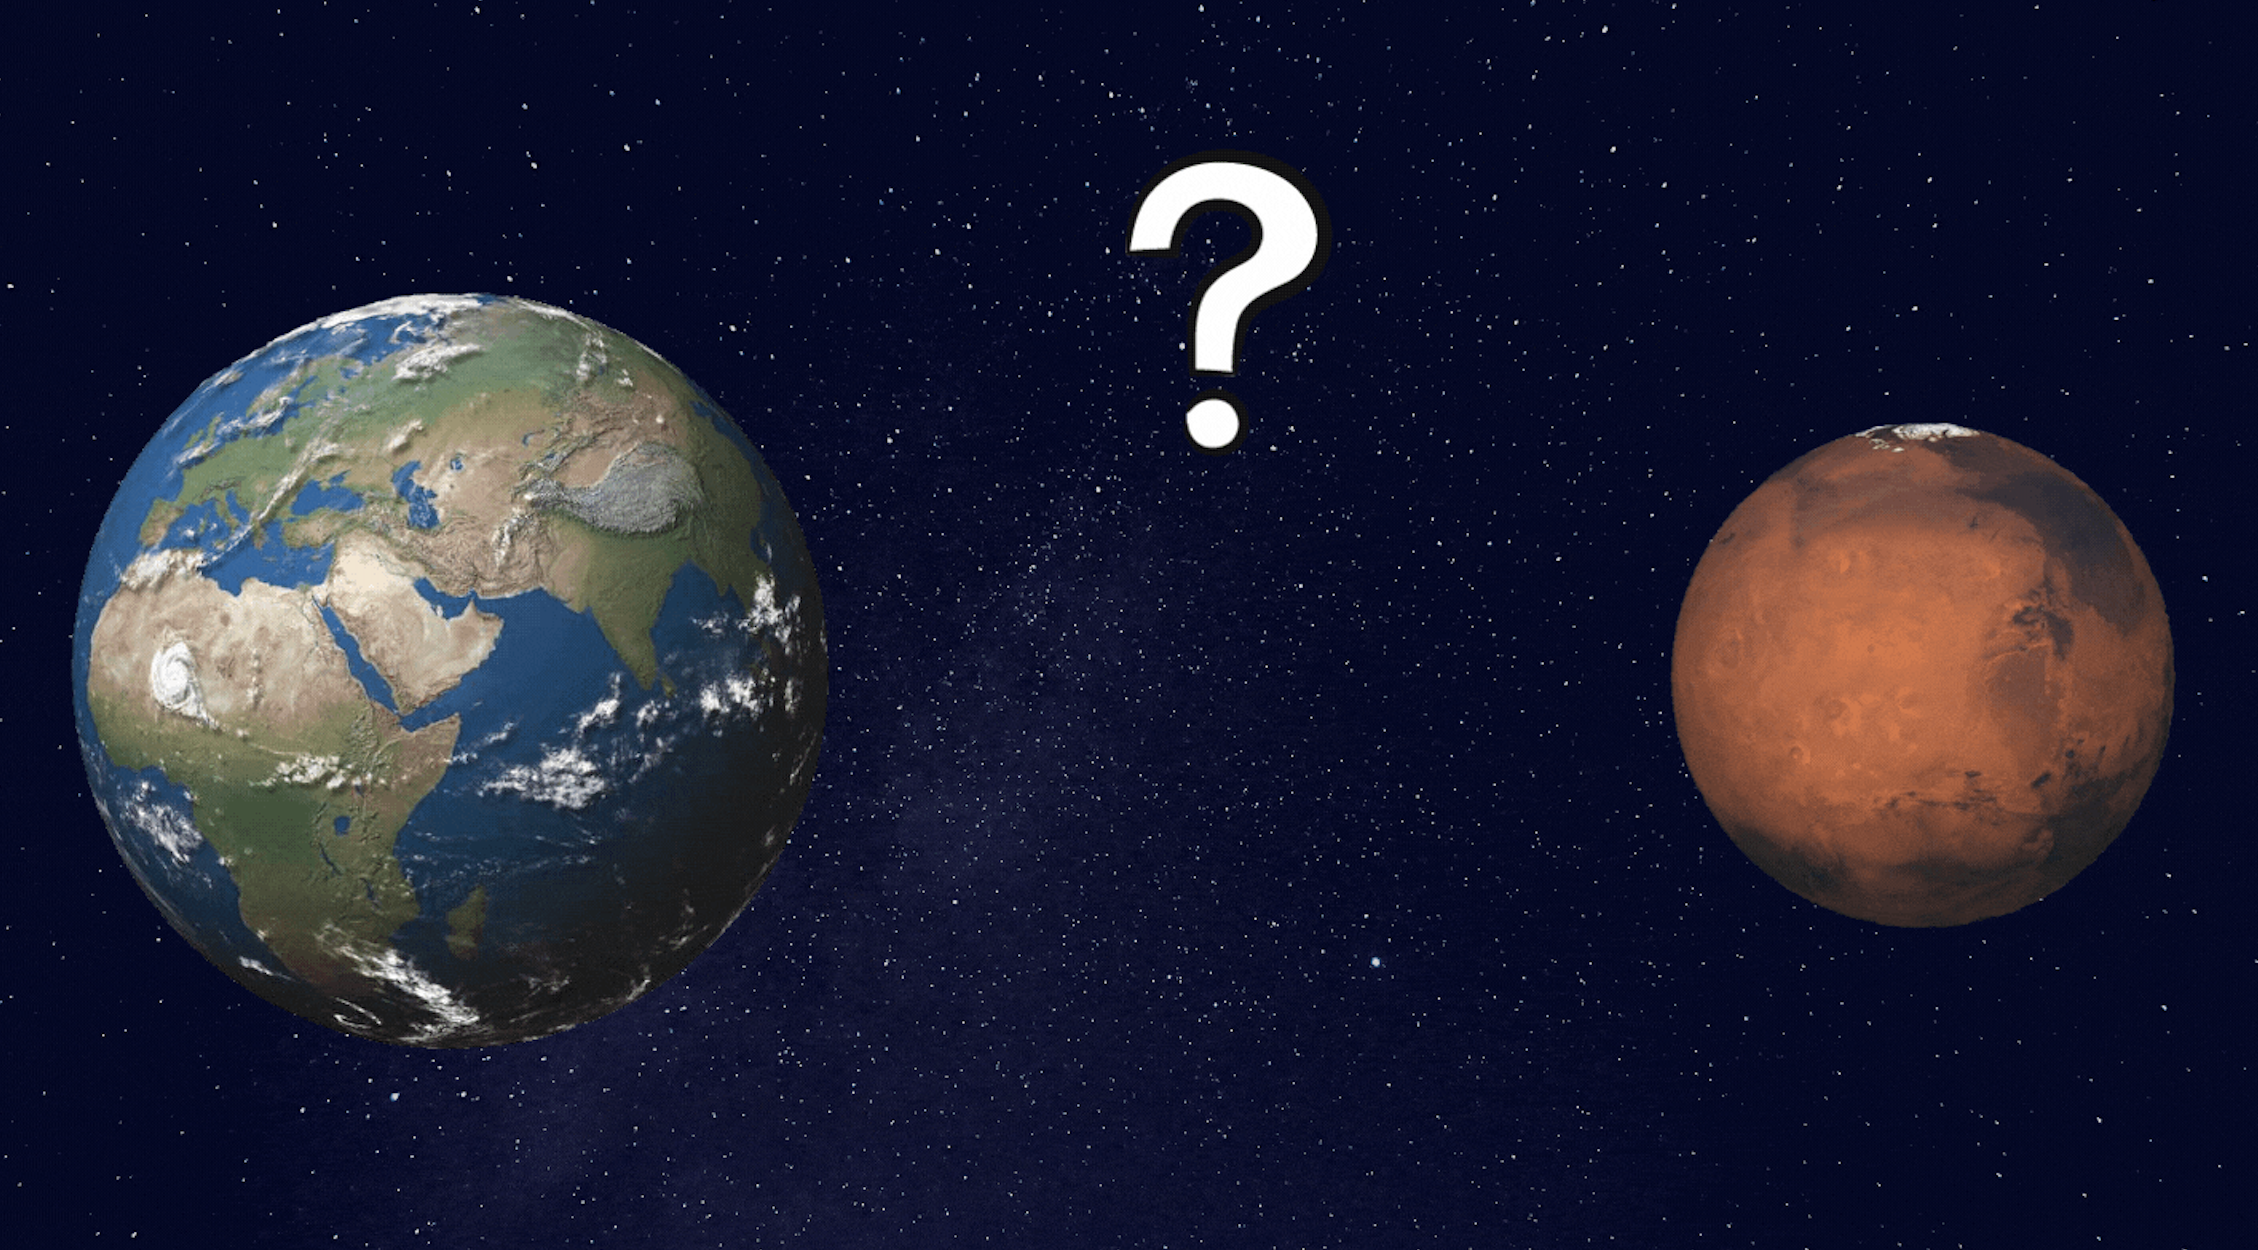 Mars vs. Earth: Which Planet has More Minerals?